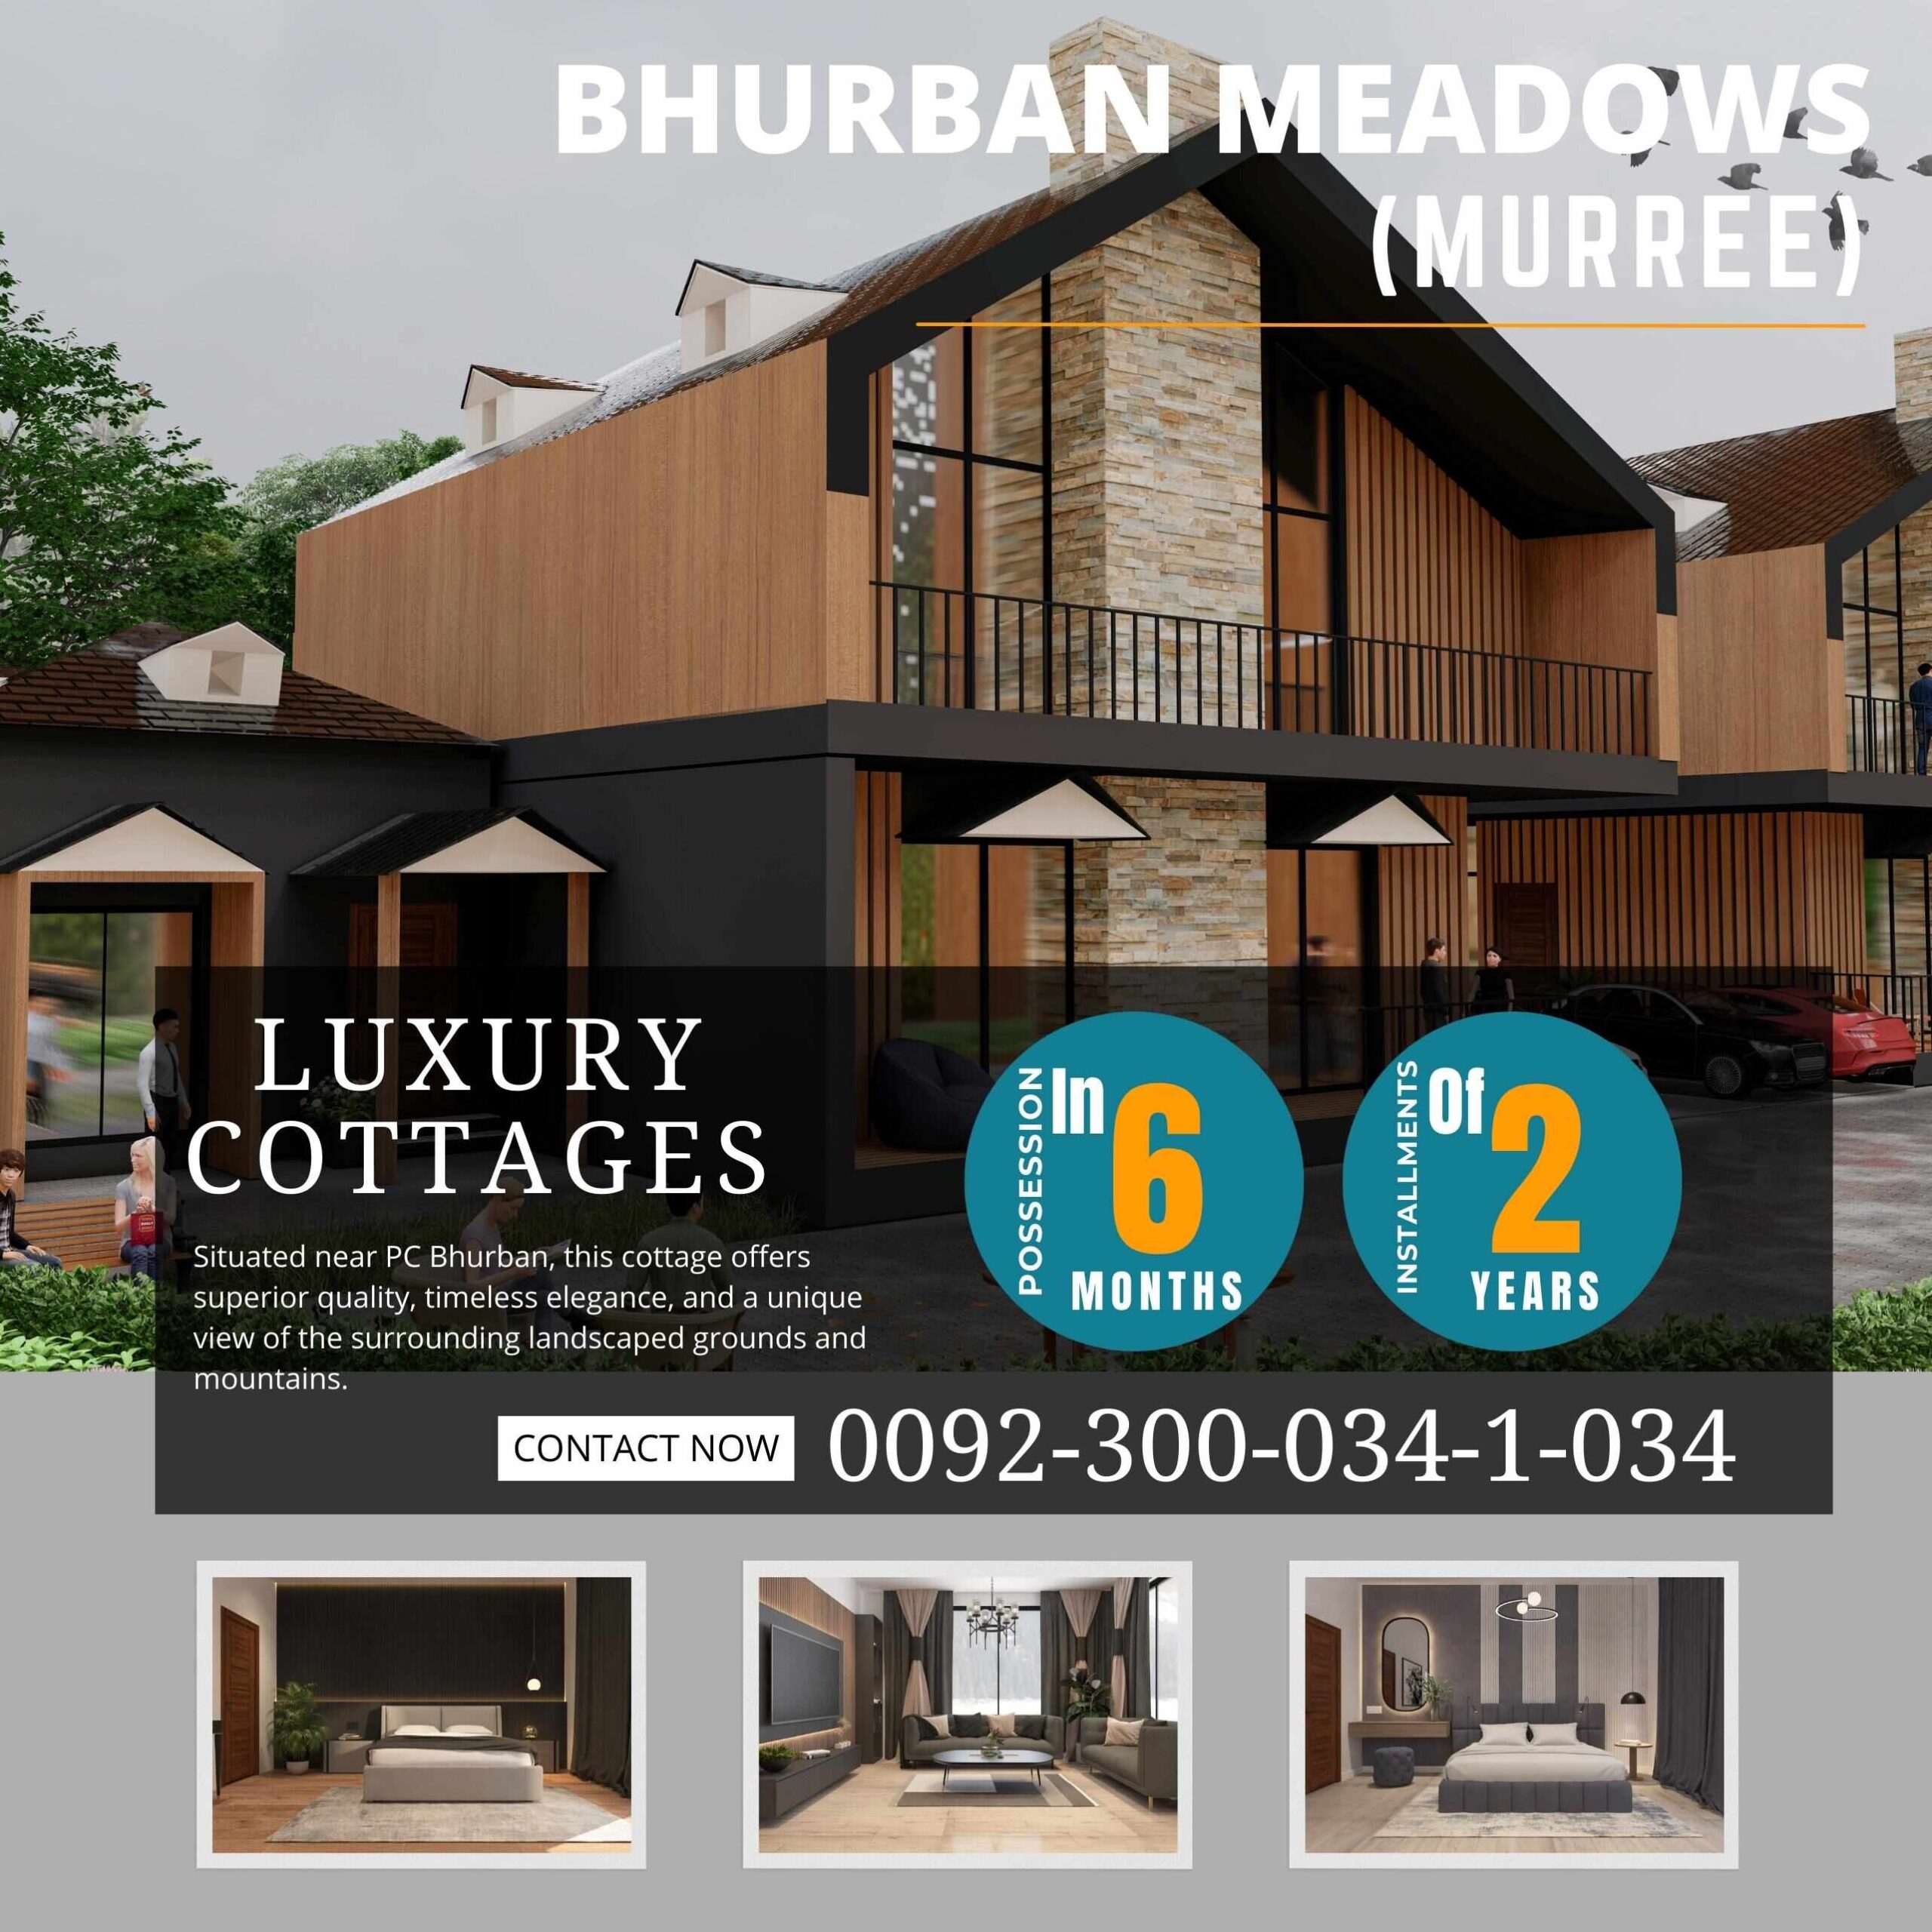 Cottage Cliff Dwellers Pvt Limited: Your Gateway to Luxury Living in the Heart of Murree.